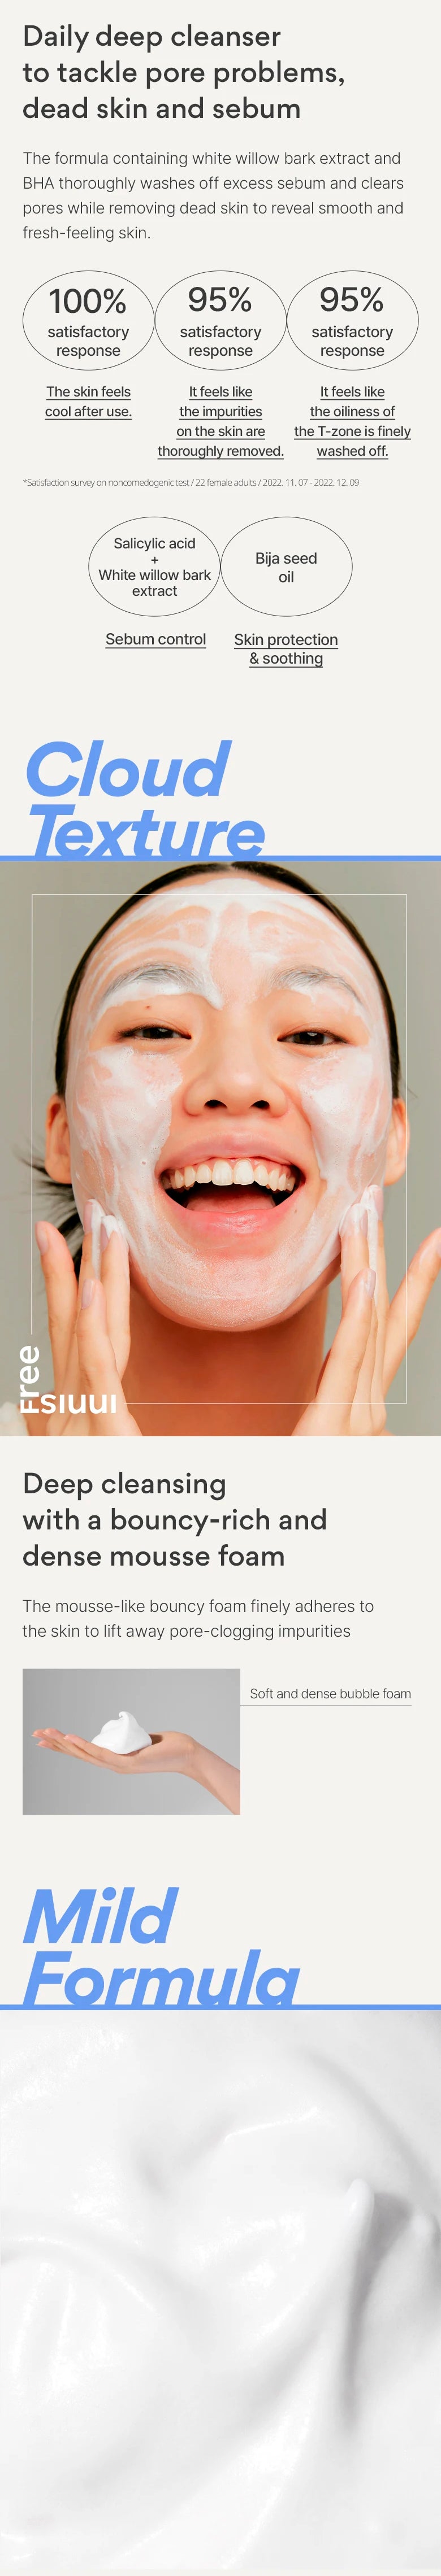 Deep cleansing foam for pores and dead skin cells.